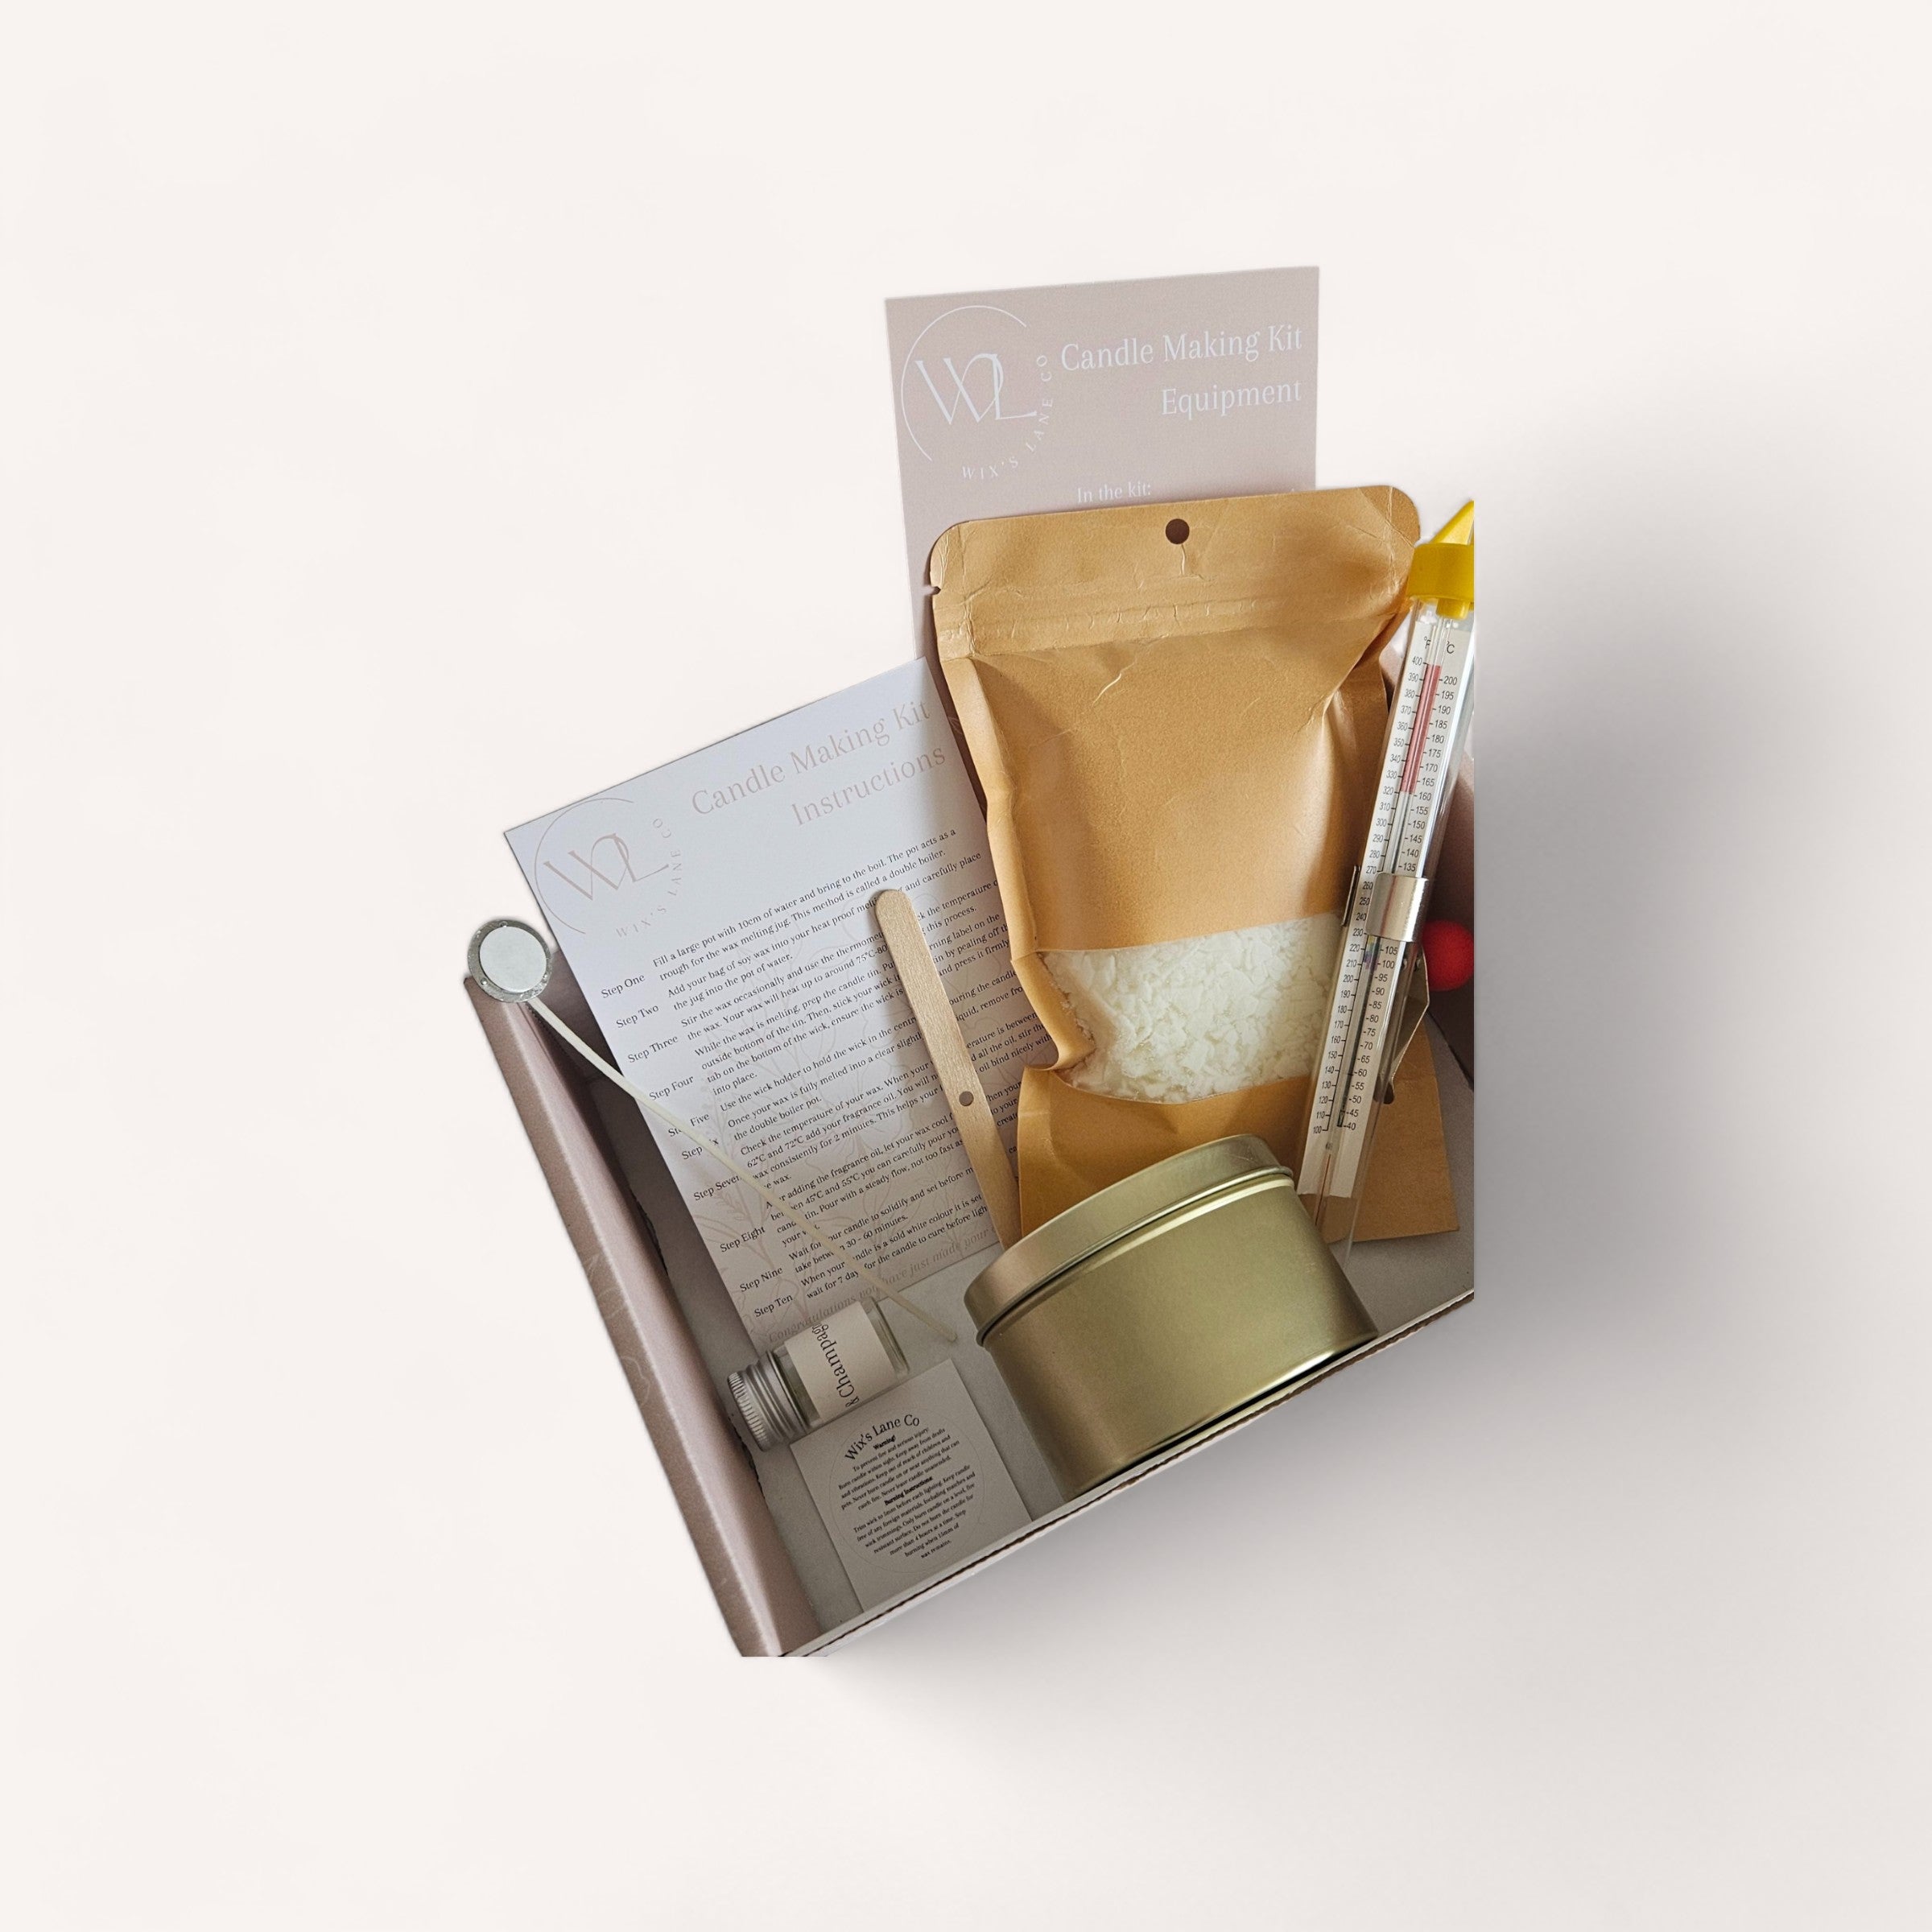 DIY Candle Making Kit by Wix's Lane Co.: unleash your creativity with your own handcrafted soy wax candles.